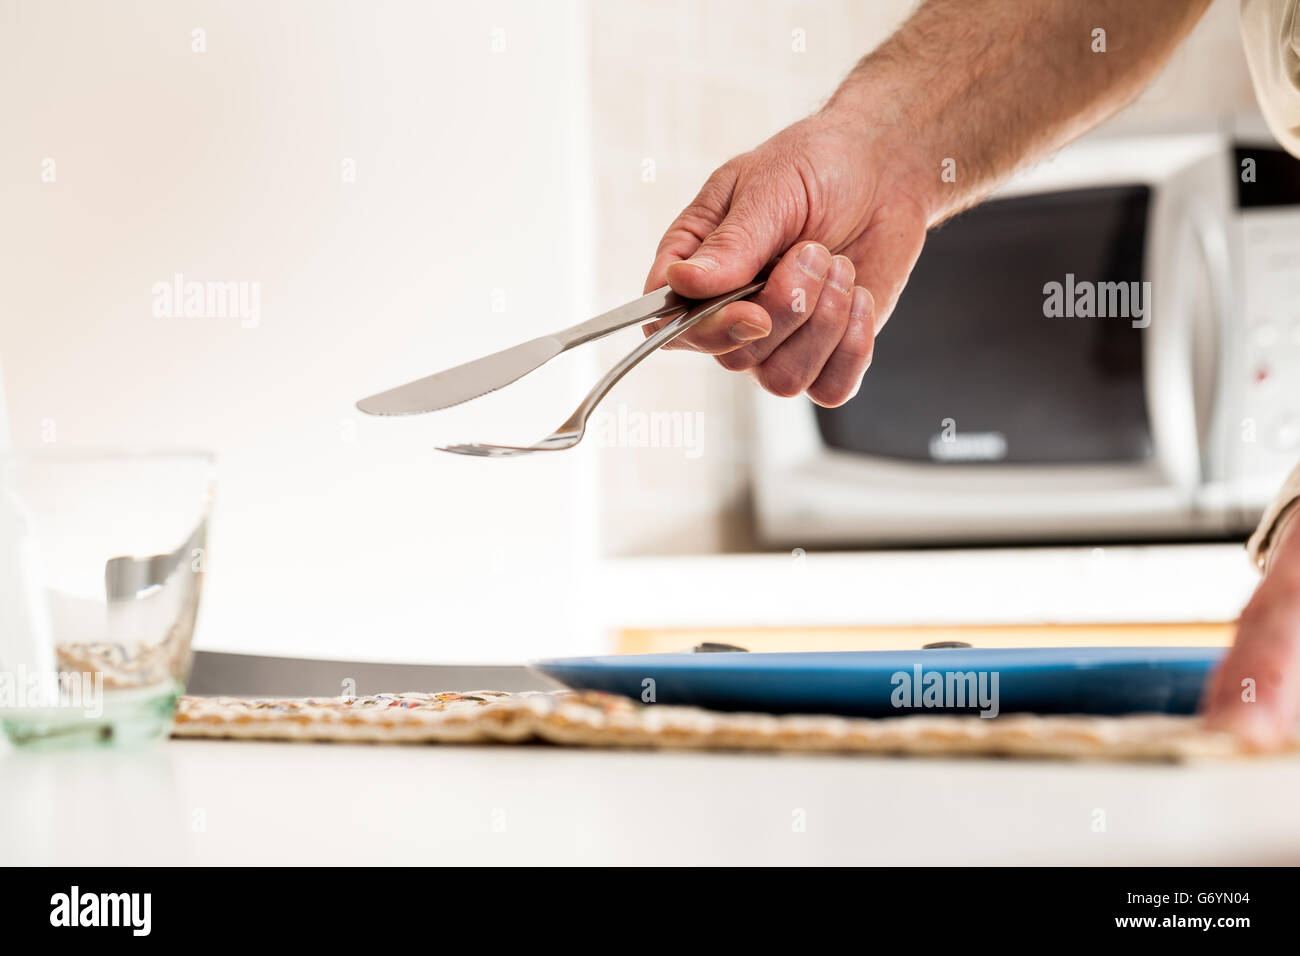 Close up of hand holding knife and fork at table with glass and plate underneath and microwave oven in background Stock Photo